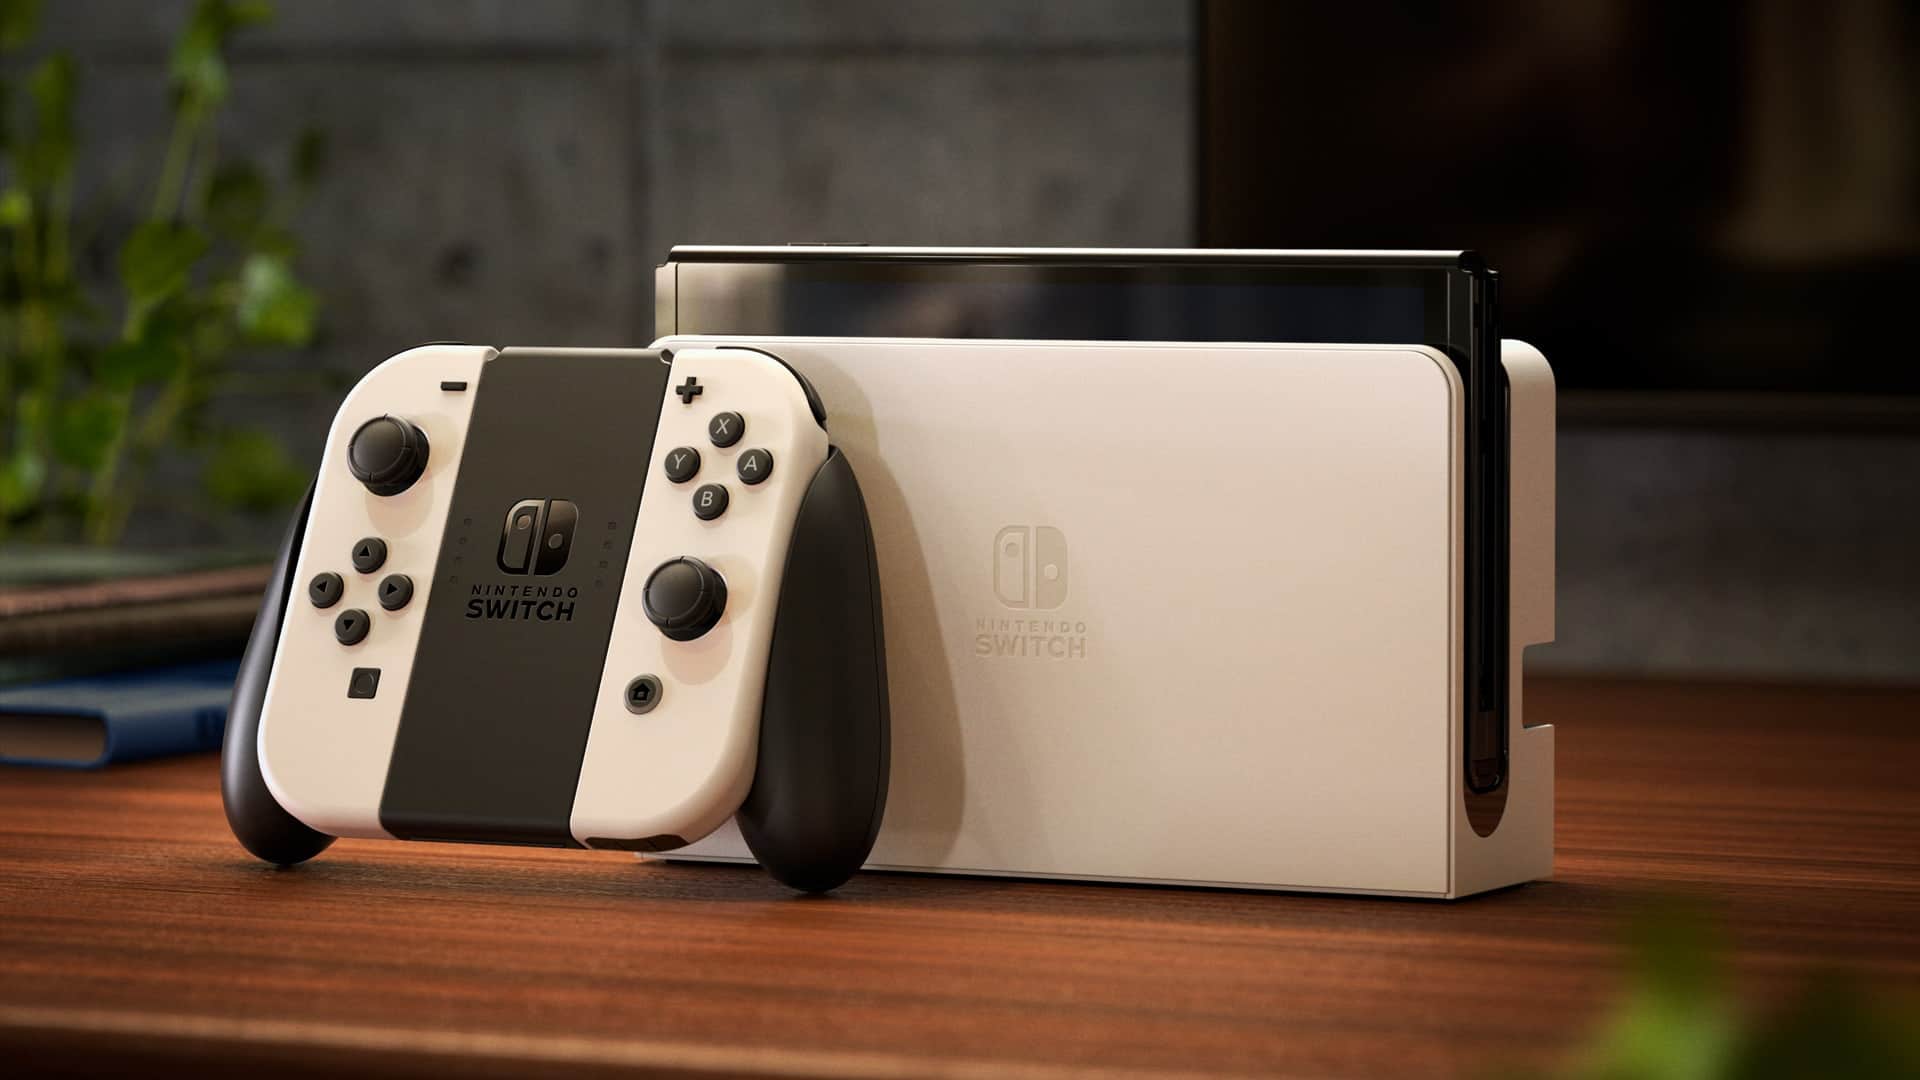 Rumored Upcoming New Nintendo Console Gets More Details